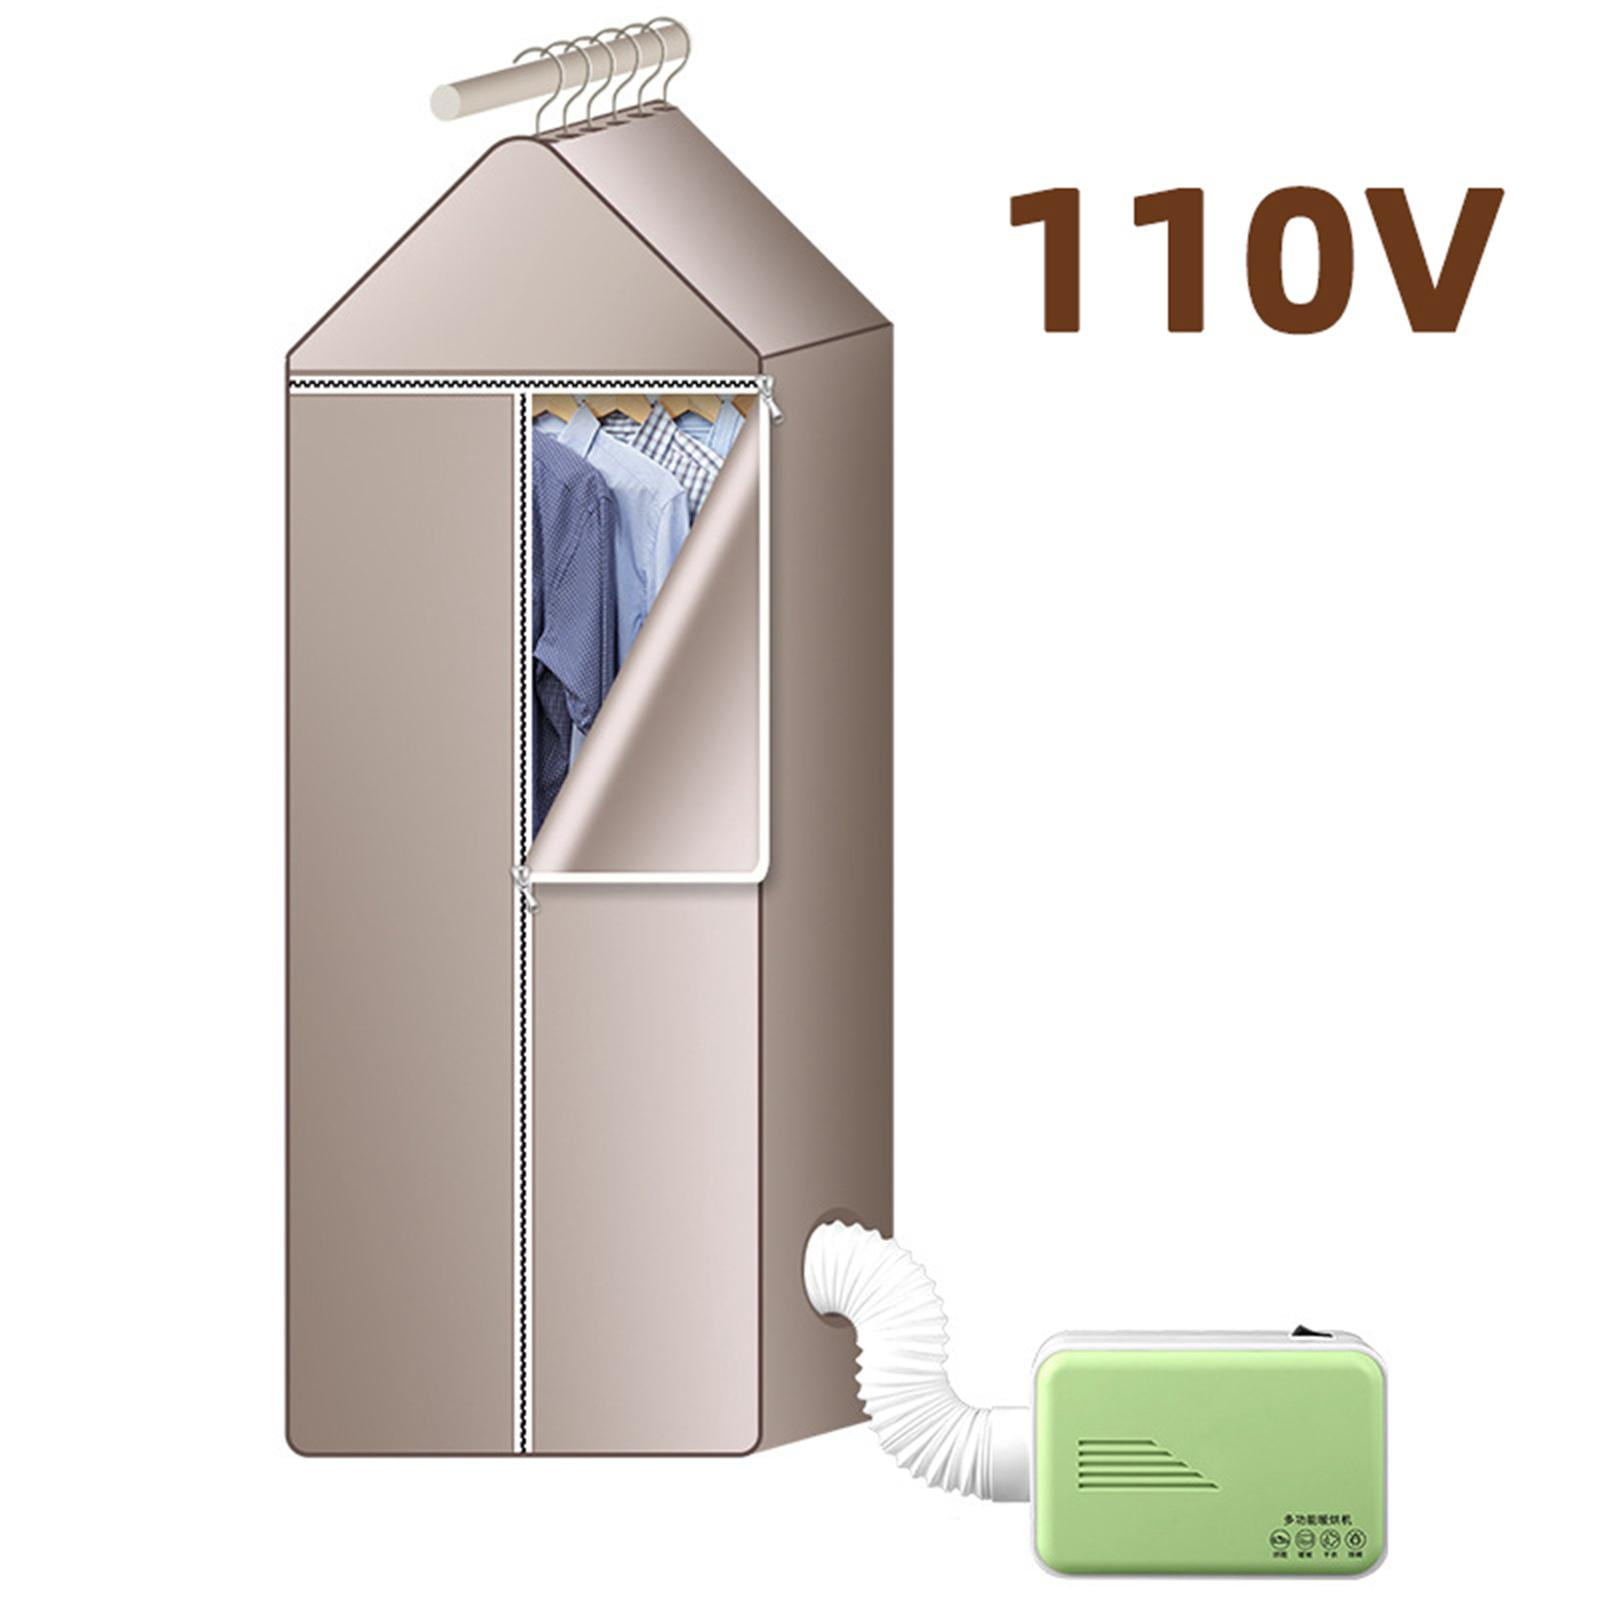 Portable Clothes Dryer - Electric Clothes and Shoe Drying Hanger Foldable Clothes Dryer with Cold/Hot Drying and Timer Dryer Rack Machine US Plug